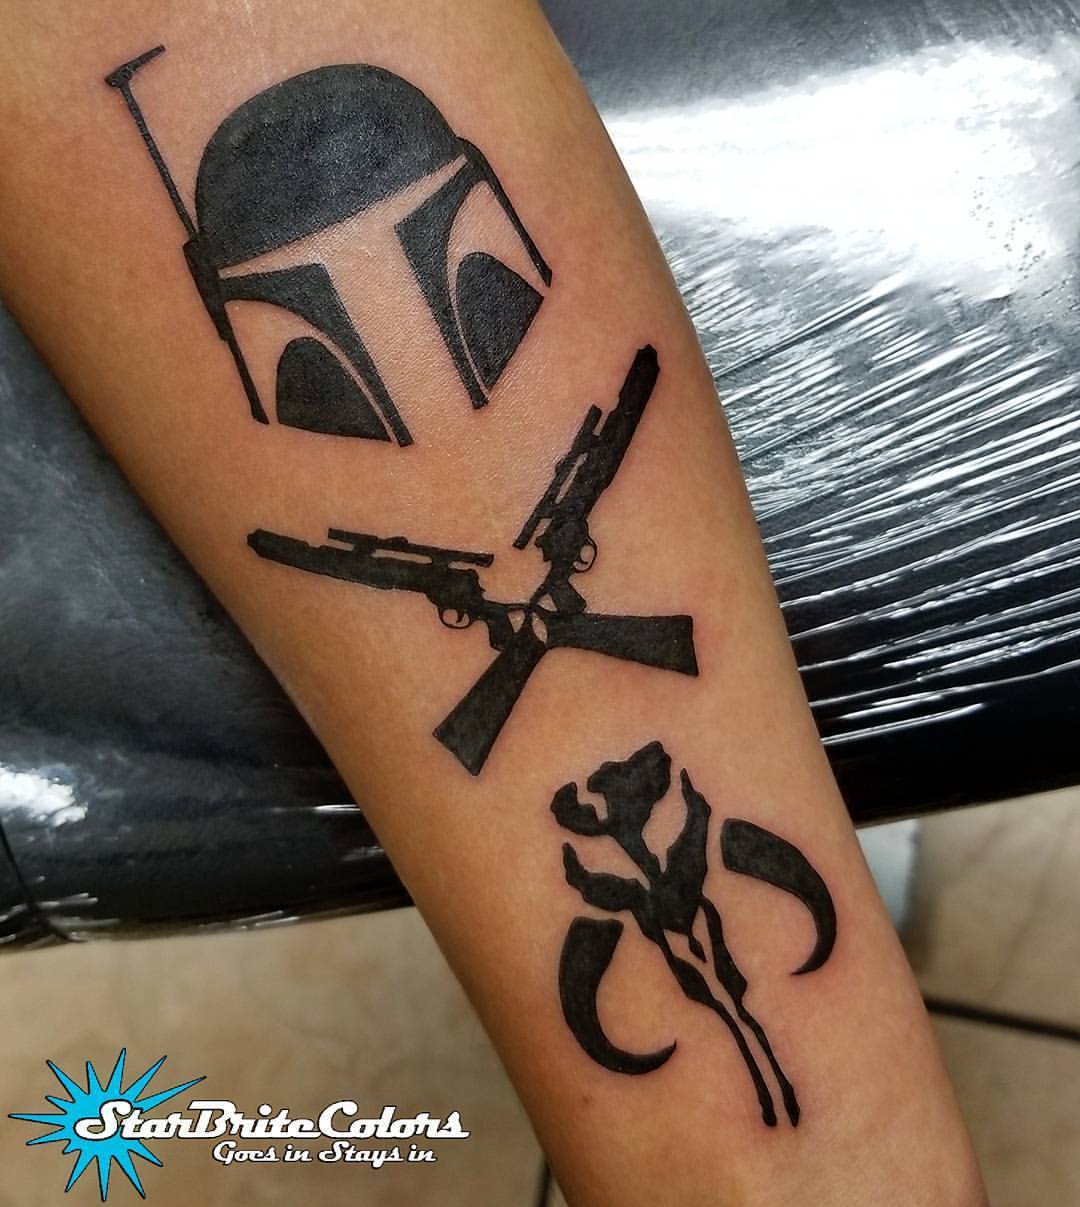 Mandalorian lore has always been one of my favorite parts of Star Wars I  got this tattoo seven years ago Im so happy that this widely  underrepresented part of the Star Wars